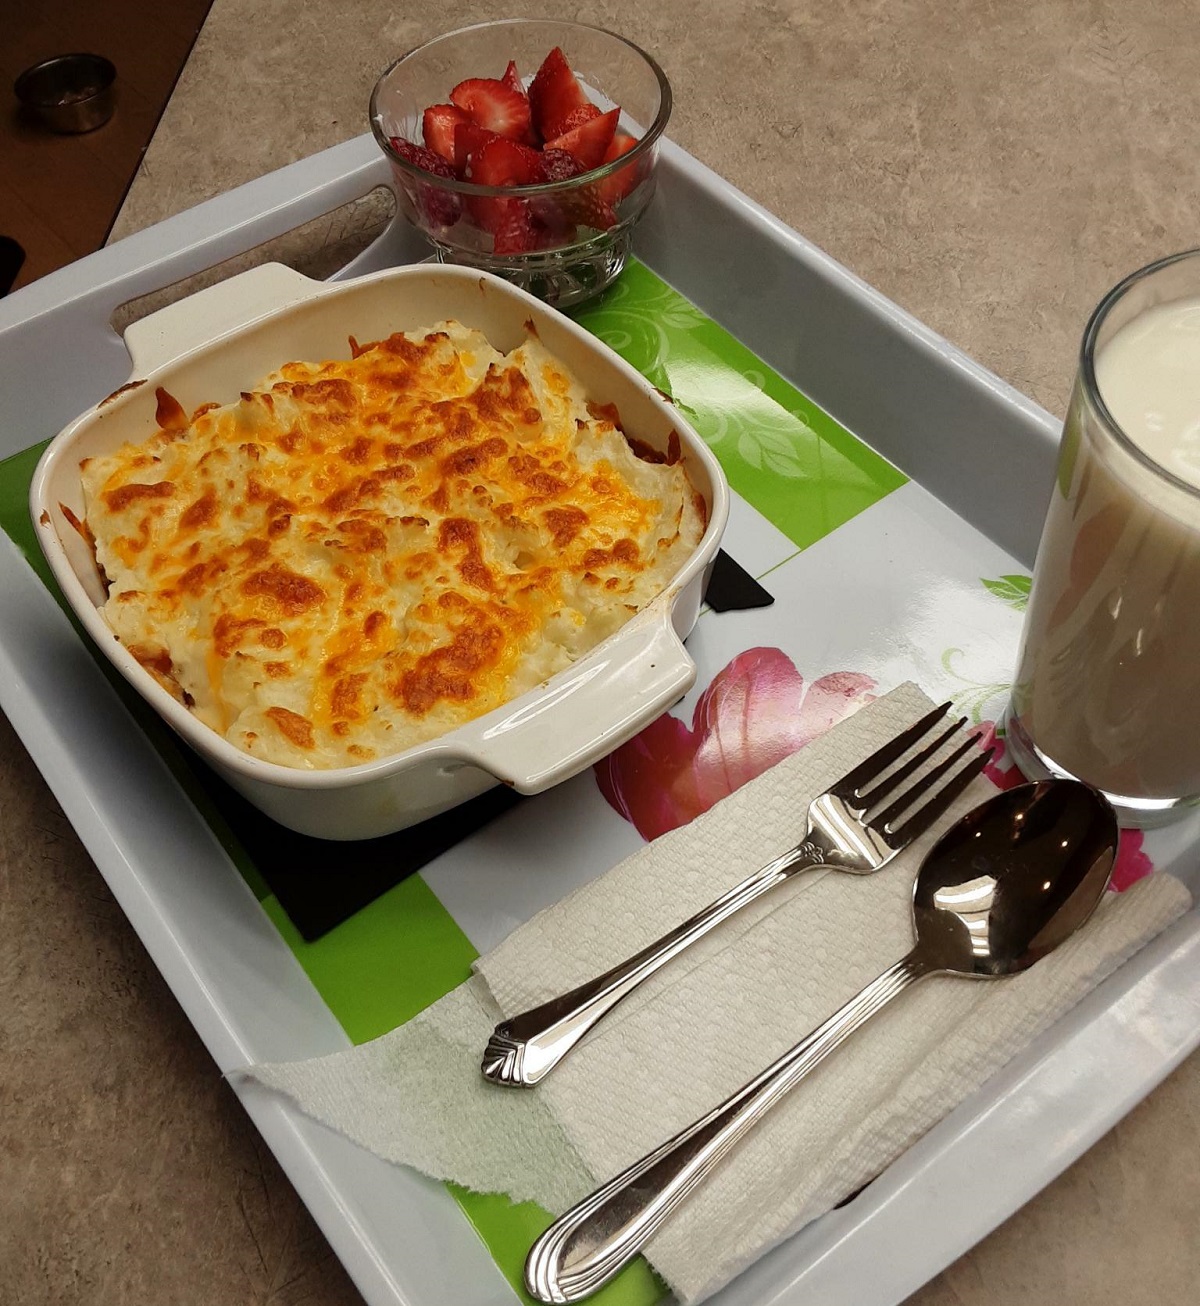 I Take Care Of My Elderly Father And Try To Make Him Good Meals. Tonight Was Shepherd's Pie And Strawberries And Cream